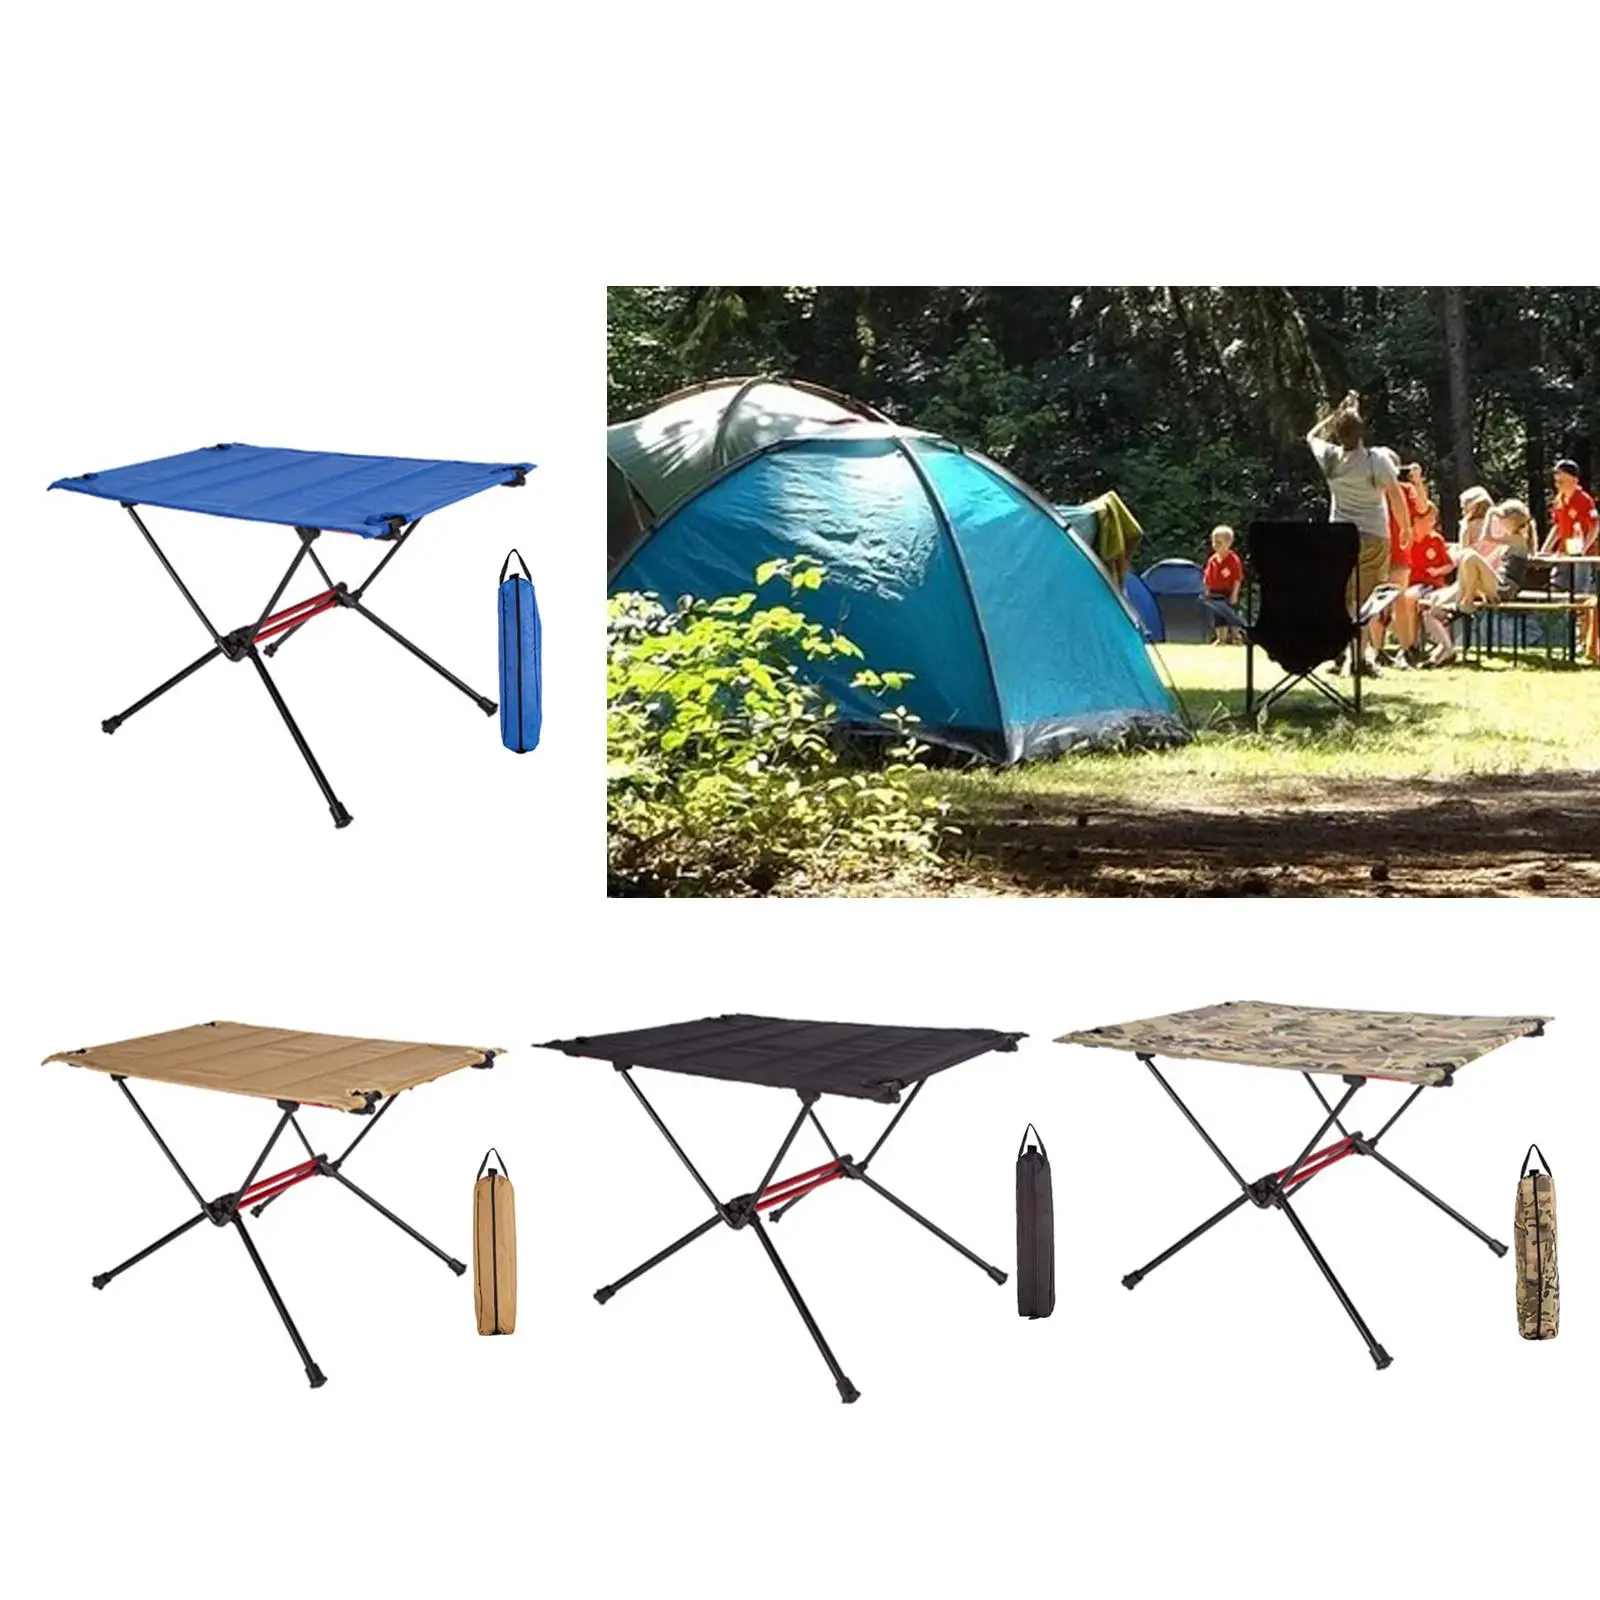 Lightweight Collapsible Aluminum Portable Roll Up Outdoor Folding Camping Table Patio Foldable Picnic Table with Carrying Bag